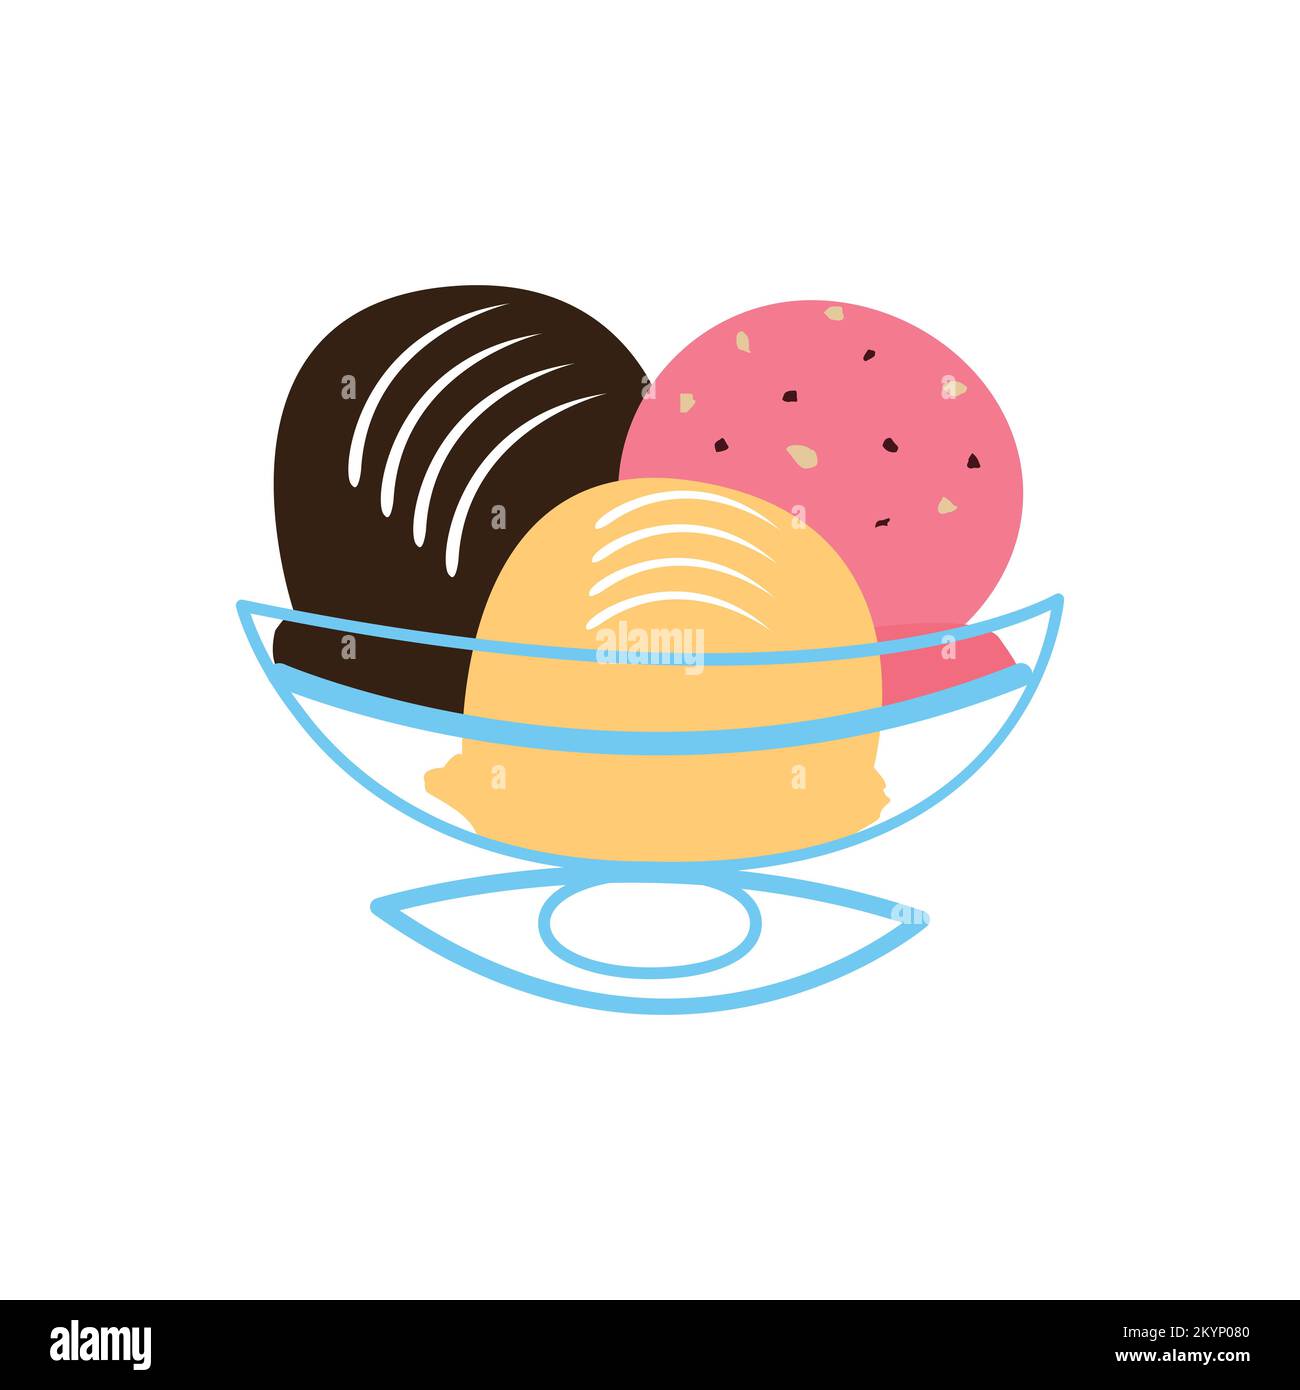 Chocolate cupcake vector illustration on white background Stock Vector